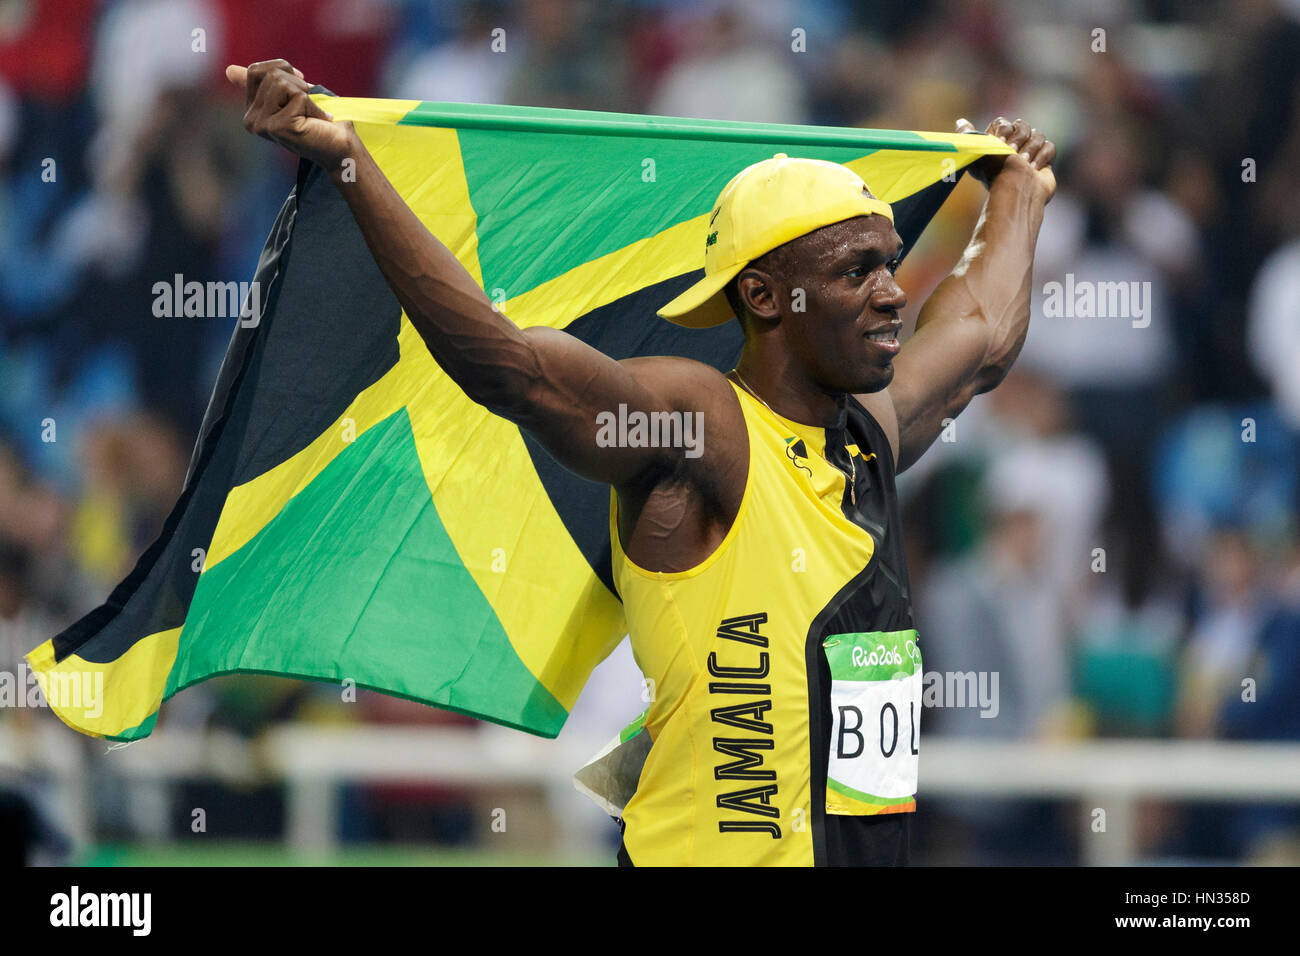 Rio de Janeiro, Brazil. 14 August 2016.  Athletics, Usian Bolt (JAM)  wins the gold in the men's 100m final at the 2016 Olympic Summer Games. ©Paul J. Stock Photo